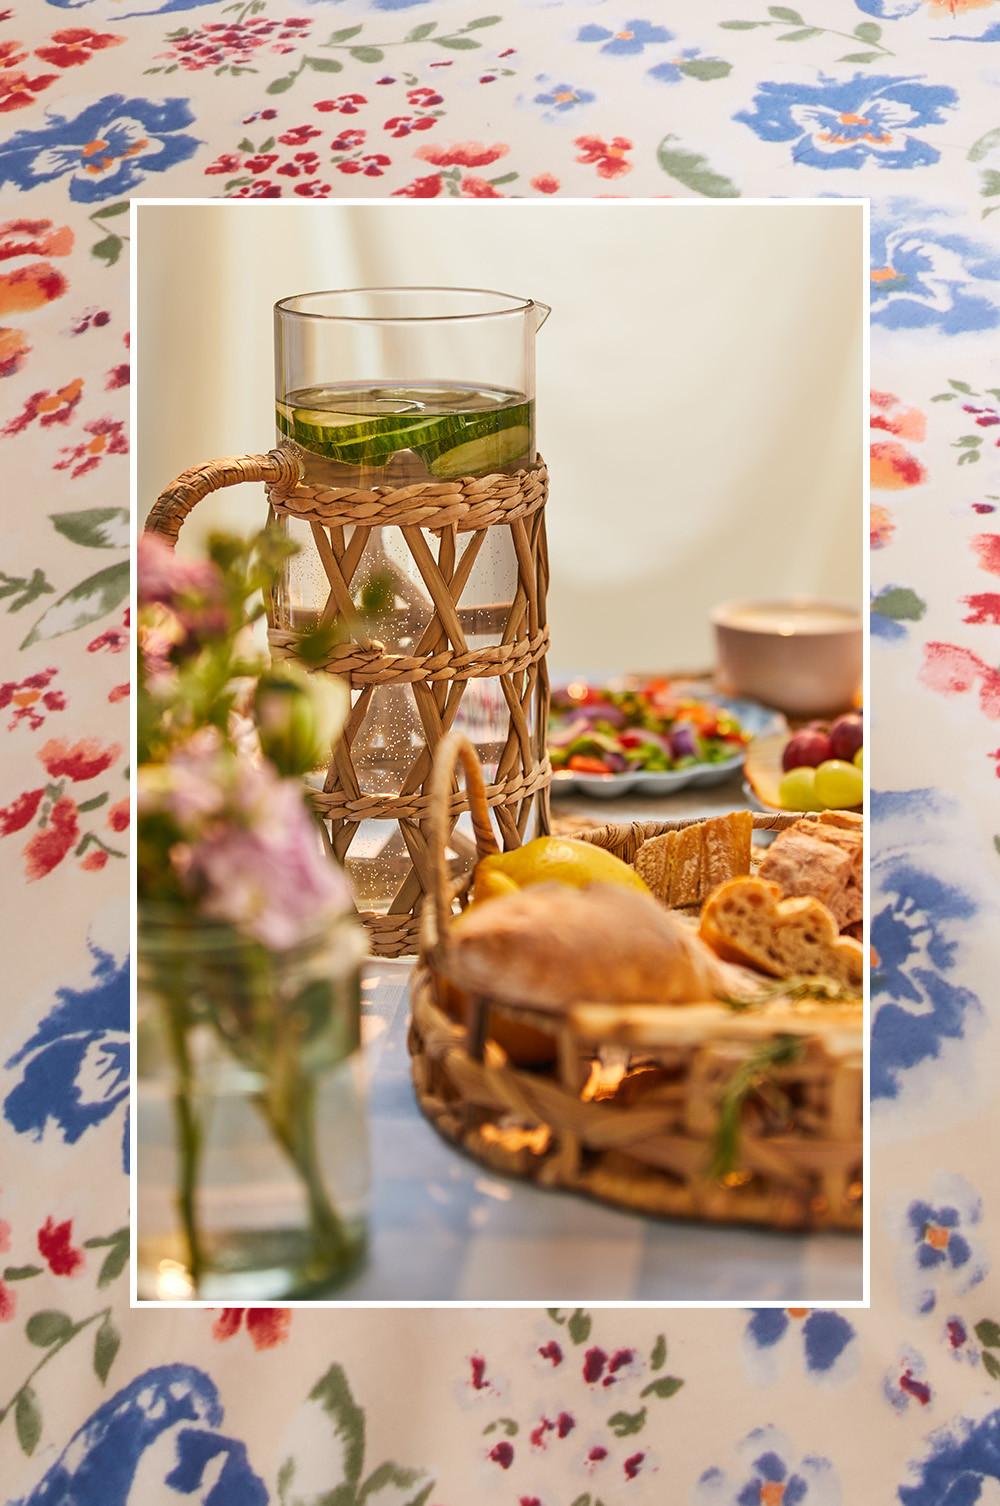 Table set up with blue gingham table cloth, with rattan basket and jugs